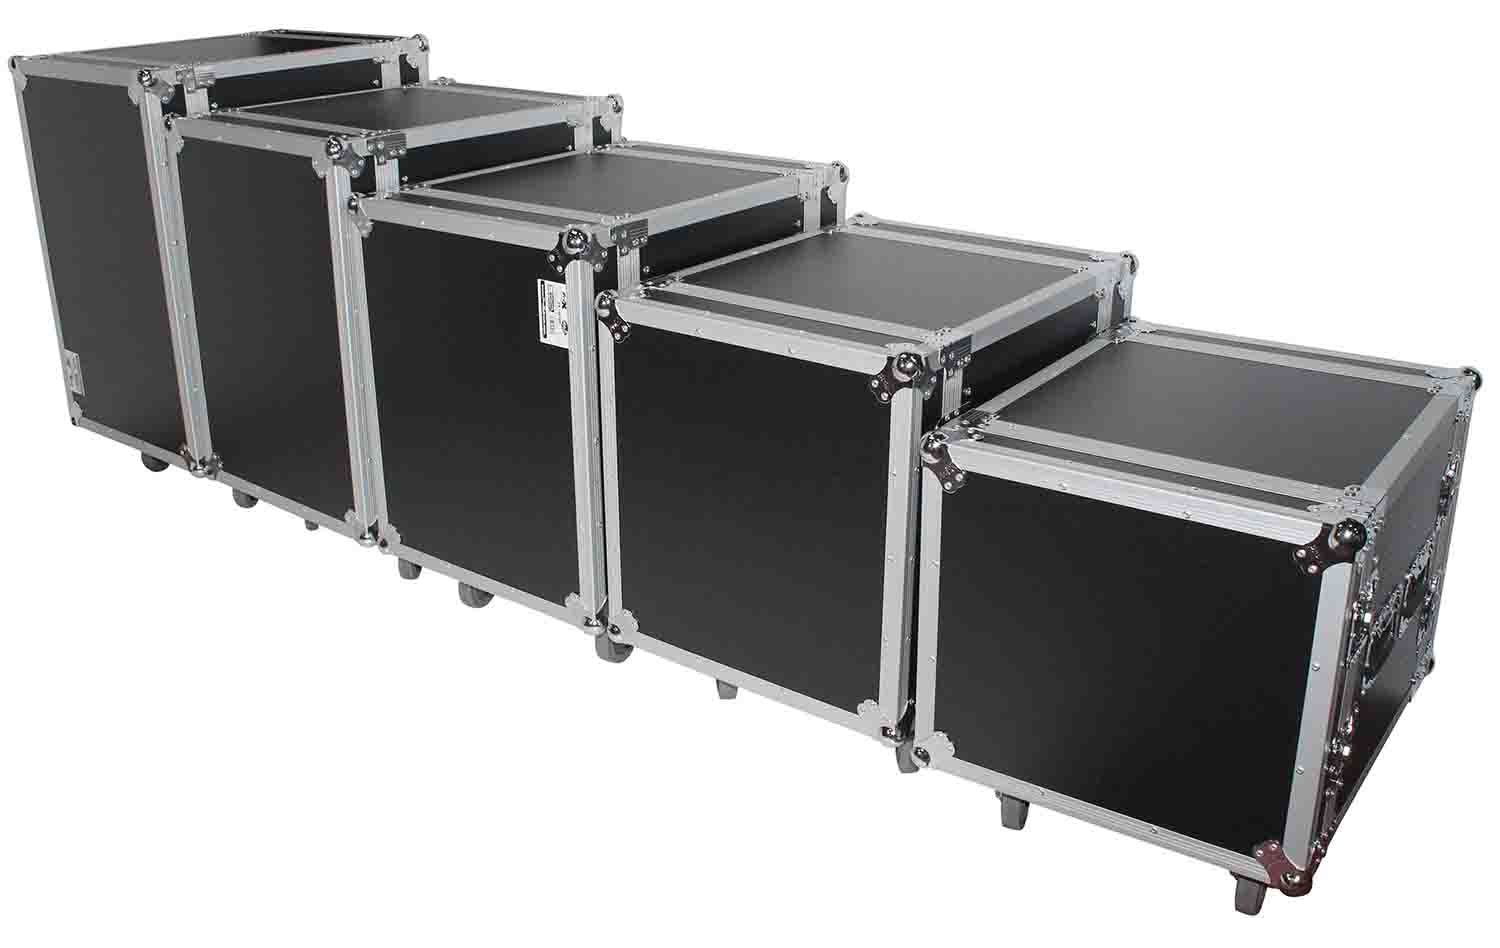 ProX XS-12R18W ,12U Space Amp Rack Mount ATA Flight Case 18 Inch Depth with Casters - Hollywood DJ